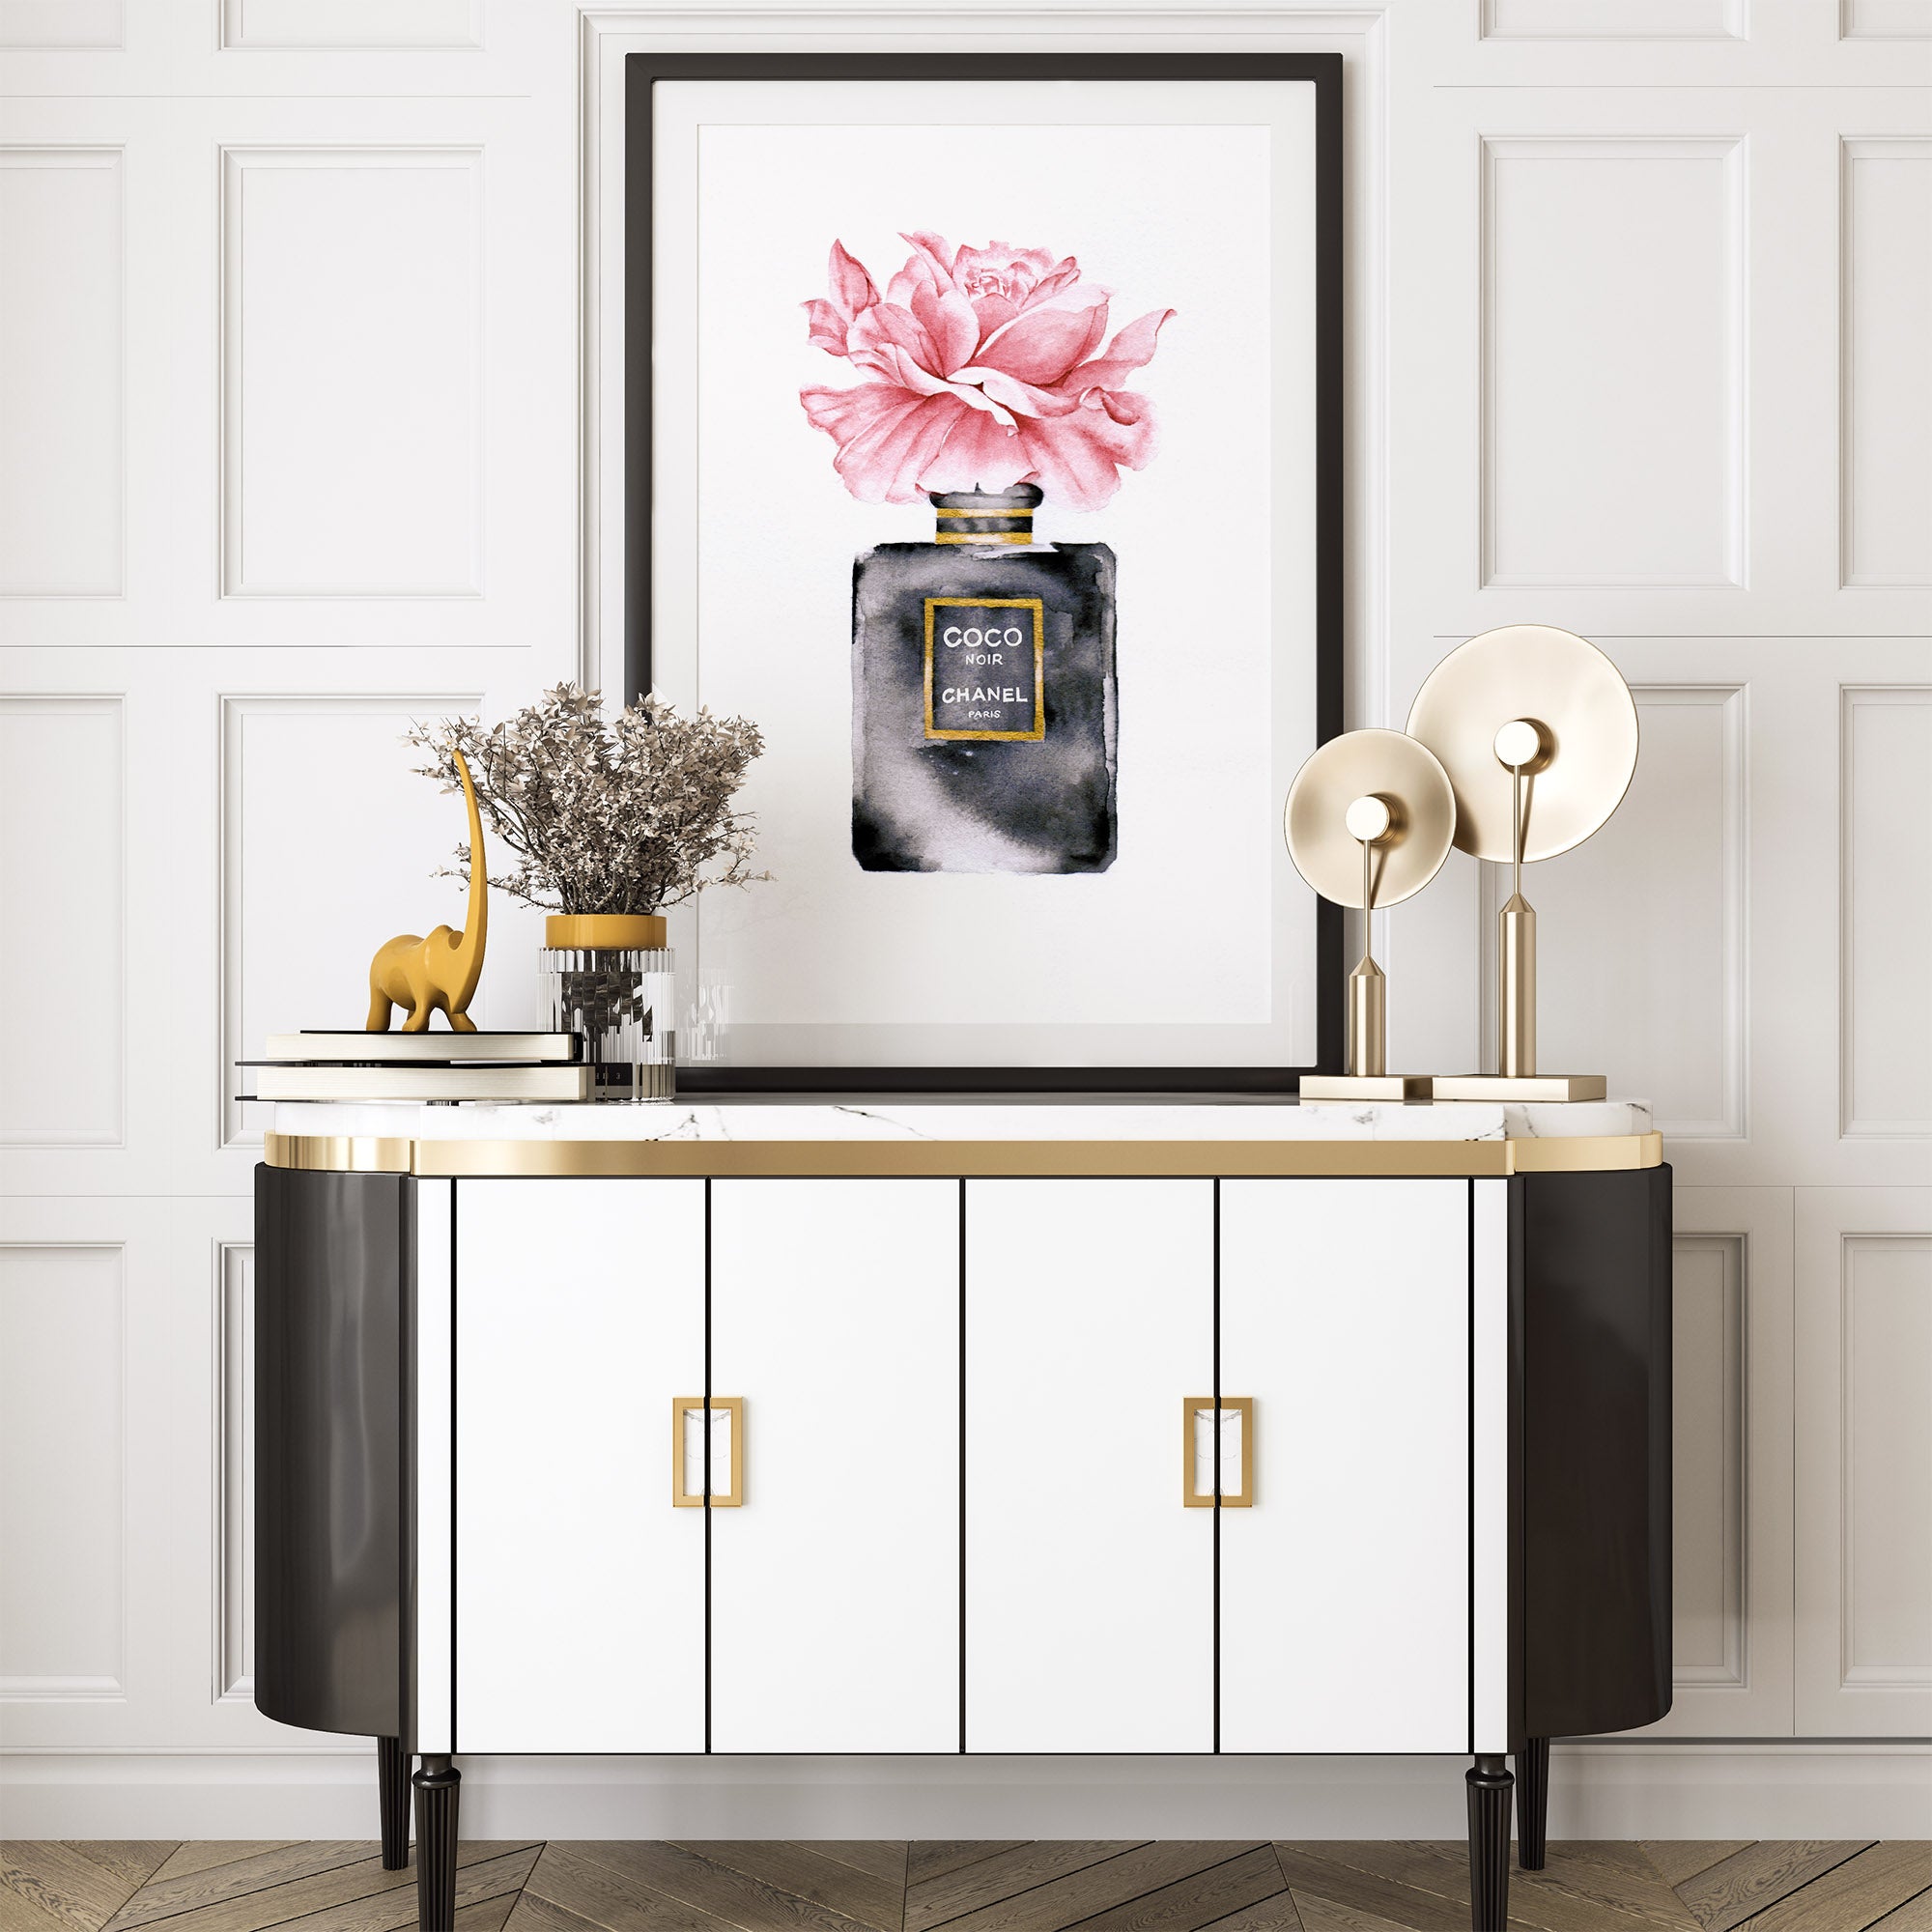 Sideboard styling with gold lamps and Coco Chanel watercolor print in black, gold and pink